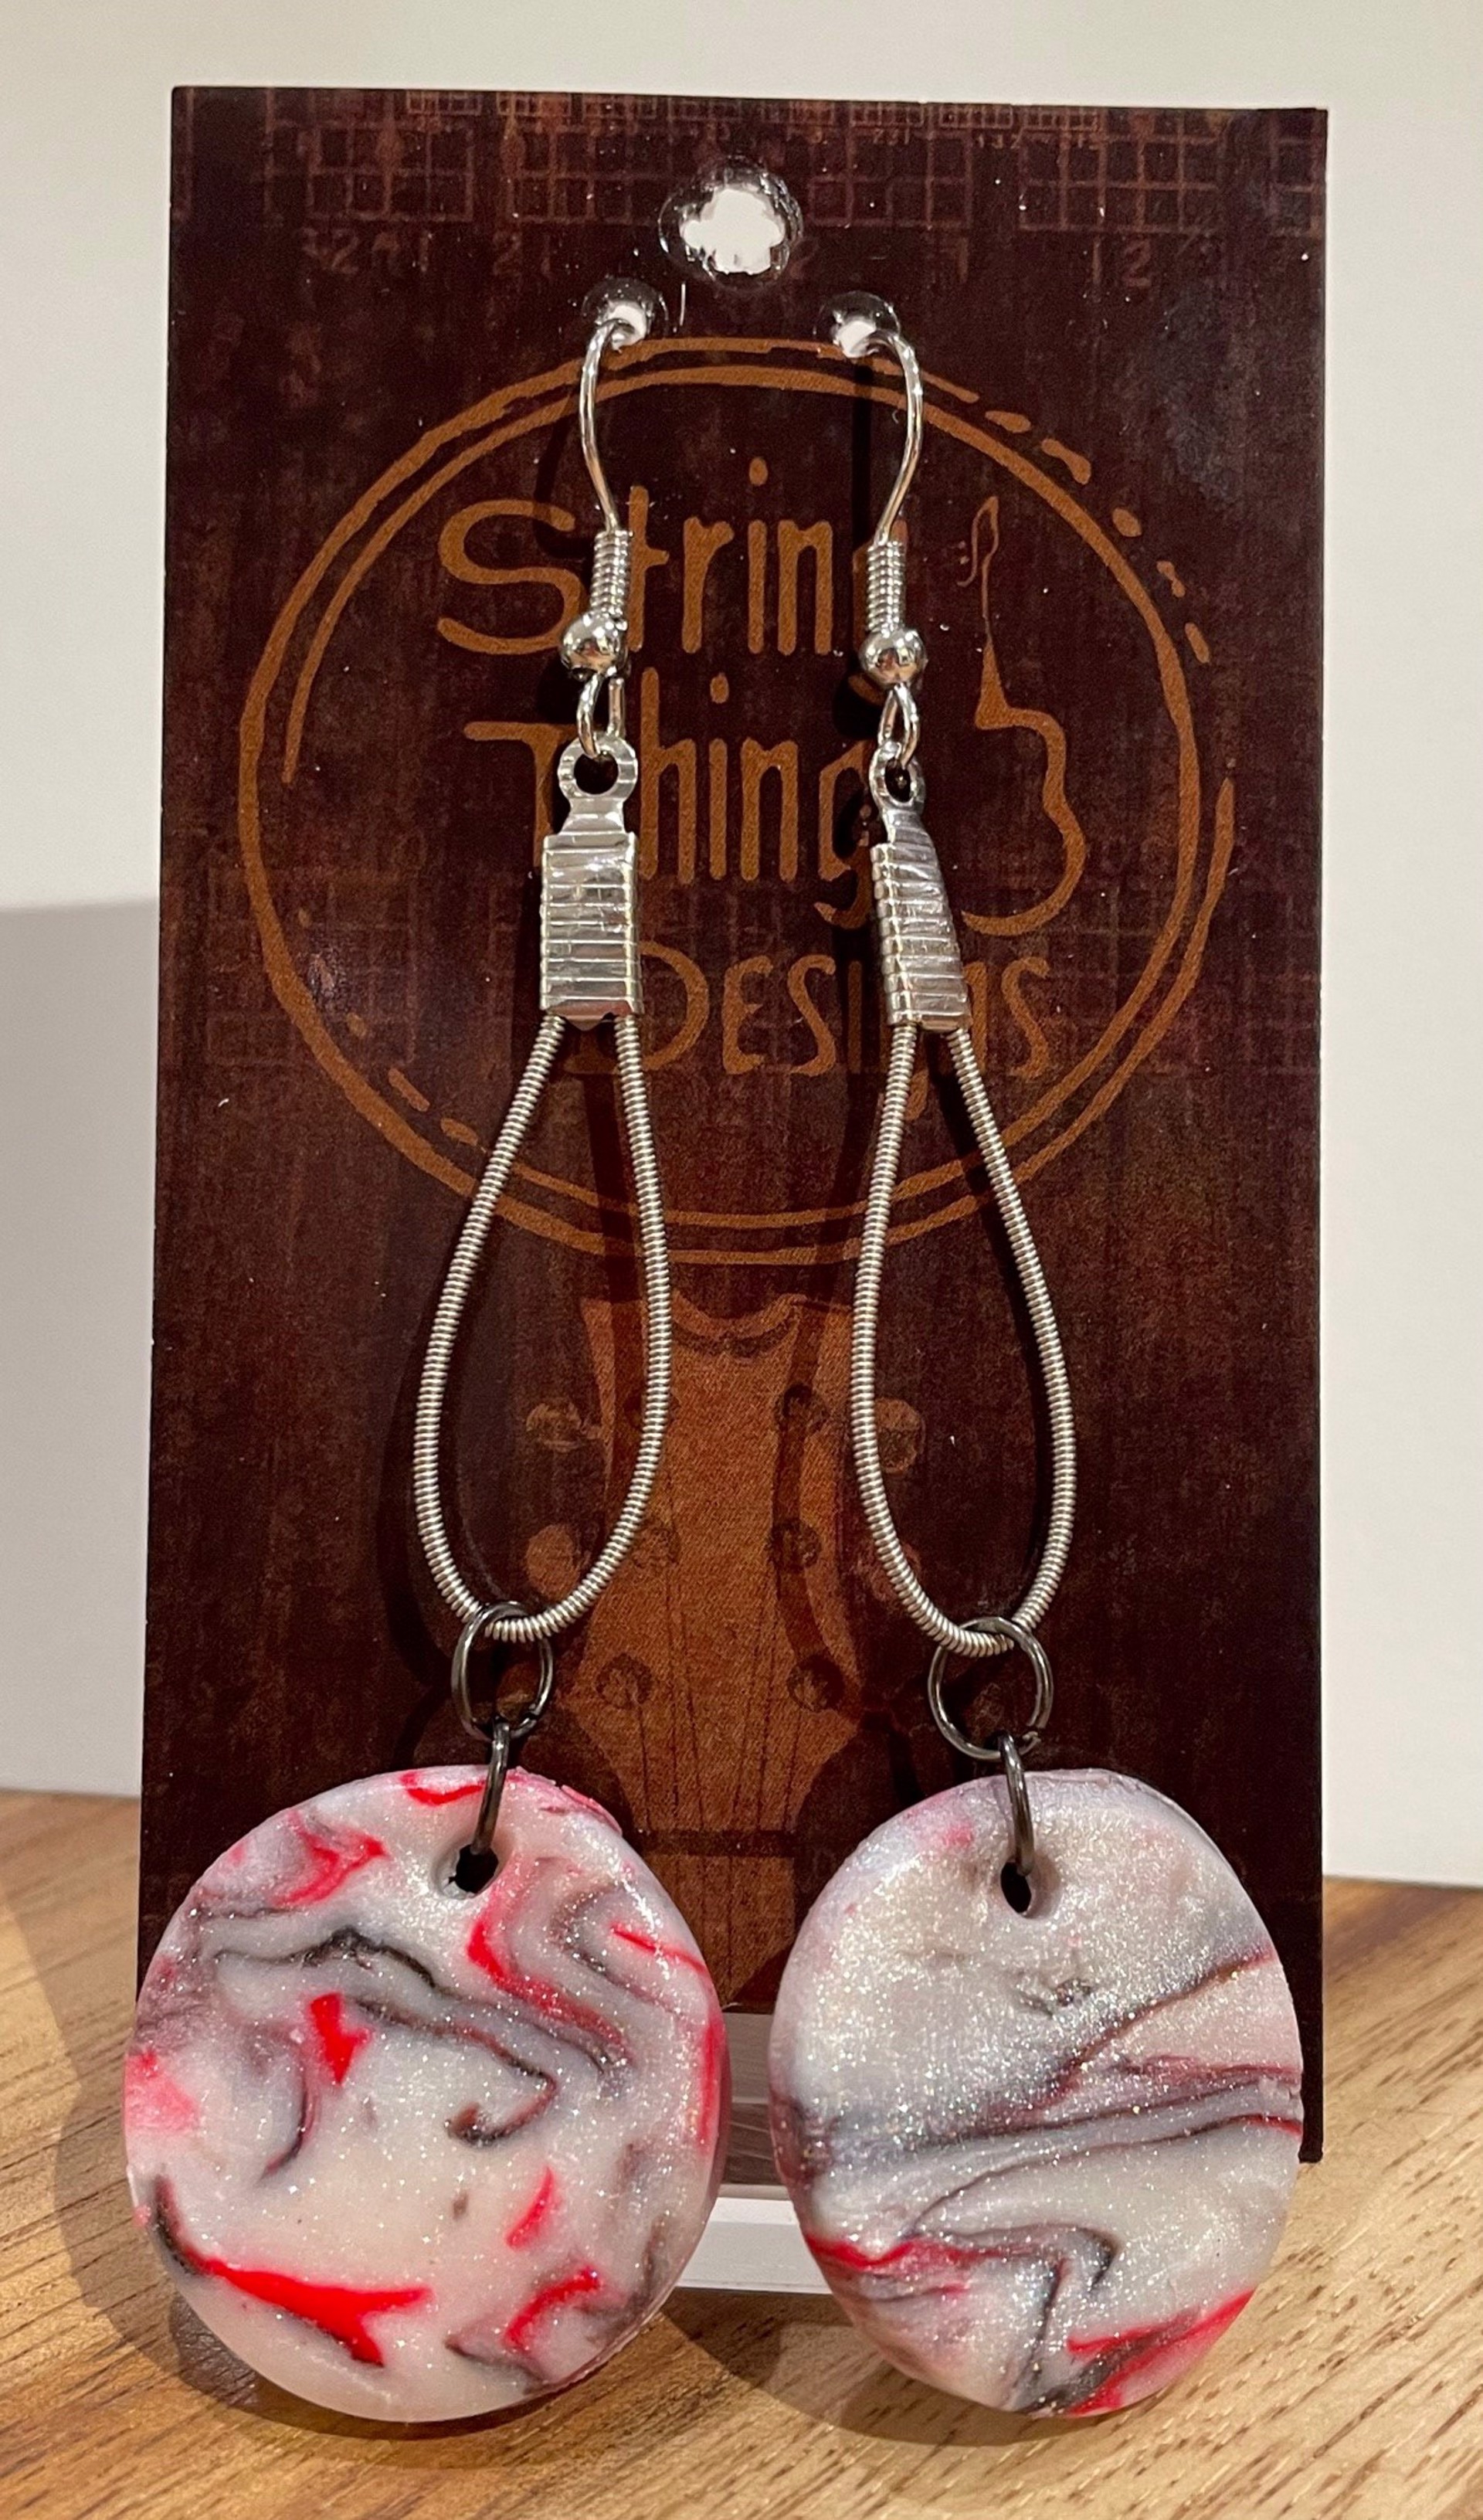 White, Red, and Black Guitar String Earrings by String Thing Designs